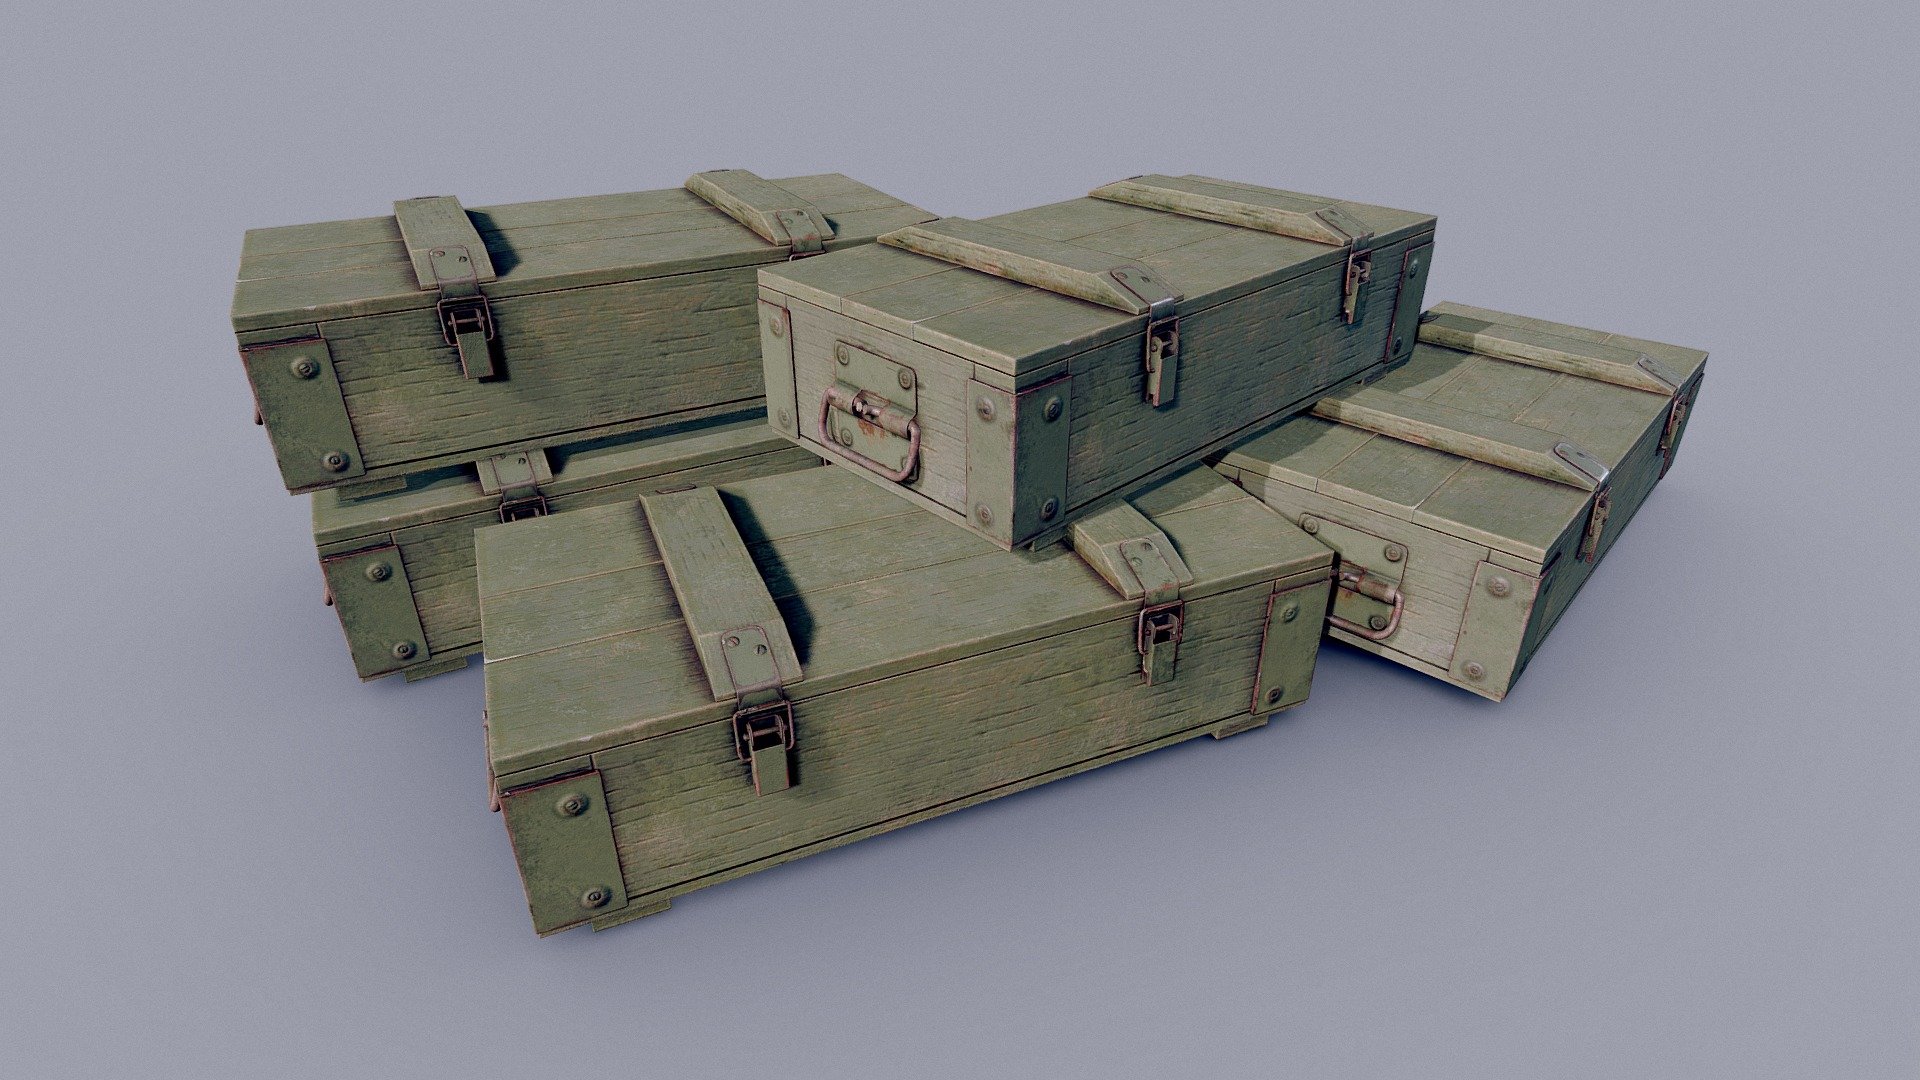 Ammunition Wood Crates 01 - PBR

Very Detailed Low Poly Ammunition Wood Crates, with High-Quality PBR Textures.

Fits perfect for any PBR game as Environment Decoration etc.

Please Note! The Crate cannot be opened.

Created with 3DSMAX, Zbrush and Substance Painter.

Standard Textures
Base Color, Metallic, Roughness, Height, AO, Normal, Maps

Unreal 4 Textures
Base Color, Normal, OcclusionRoughnessMetallic

Unity 5/2017 Textures
Albedo, SpecularSmoothness, Normal, and AO Maps

1x4096x4096 TGA Textures

Please Note, this PBR Textures Only. 

Low Poly Triangles 

5364 Tris
2848 Verts

File Formats :

.Max2019
.Max2018
.Max2017
.Max2016
.FBX
.OBJ
.3DS
.DAE - Ammunition Wood Crates 01 - PBR - Buy Royalty Free 3D model by GamePoly (@triix3d) 3d model